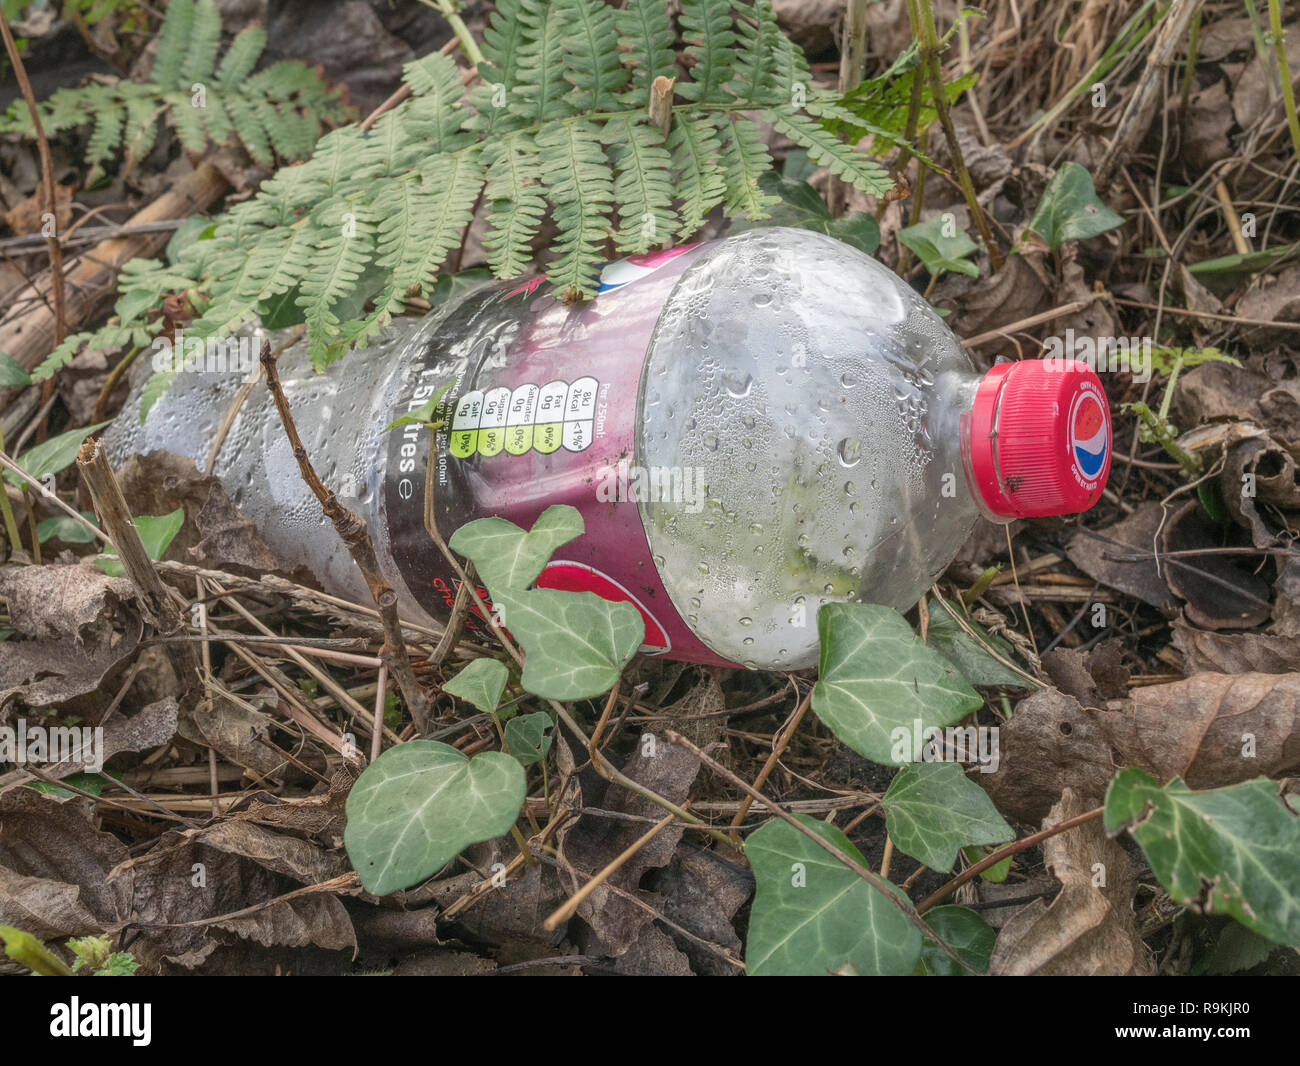 Empty PTFE plastic soft drink bottle discarded in rural hedgerow ditch. Metaphor plastic pollution, environmental pollution, war on plastic waste. Stock Photo